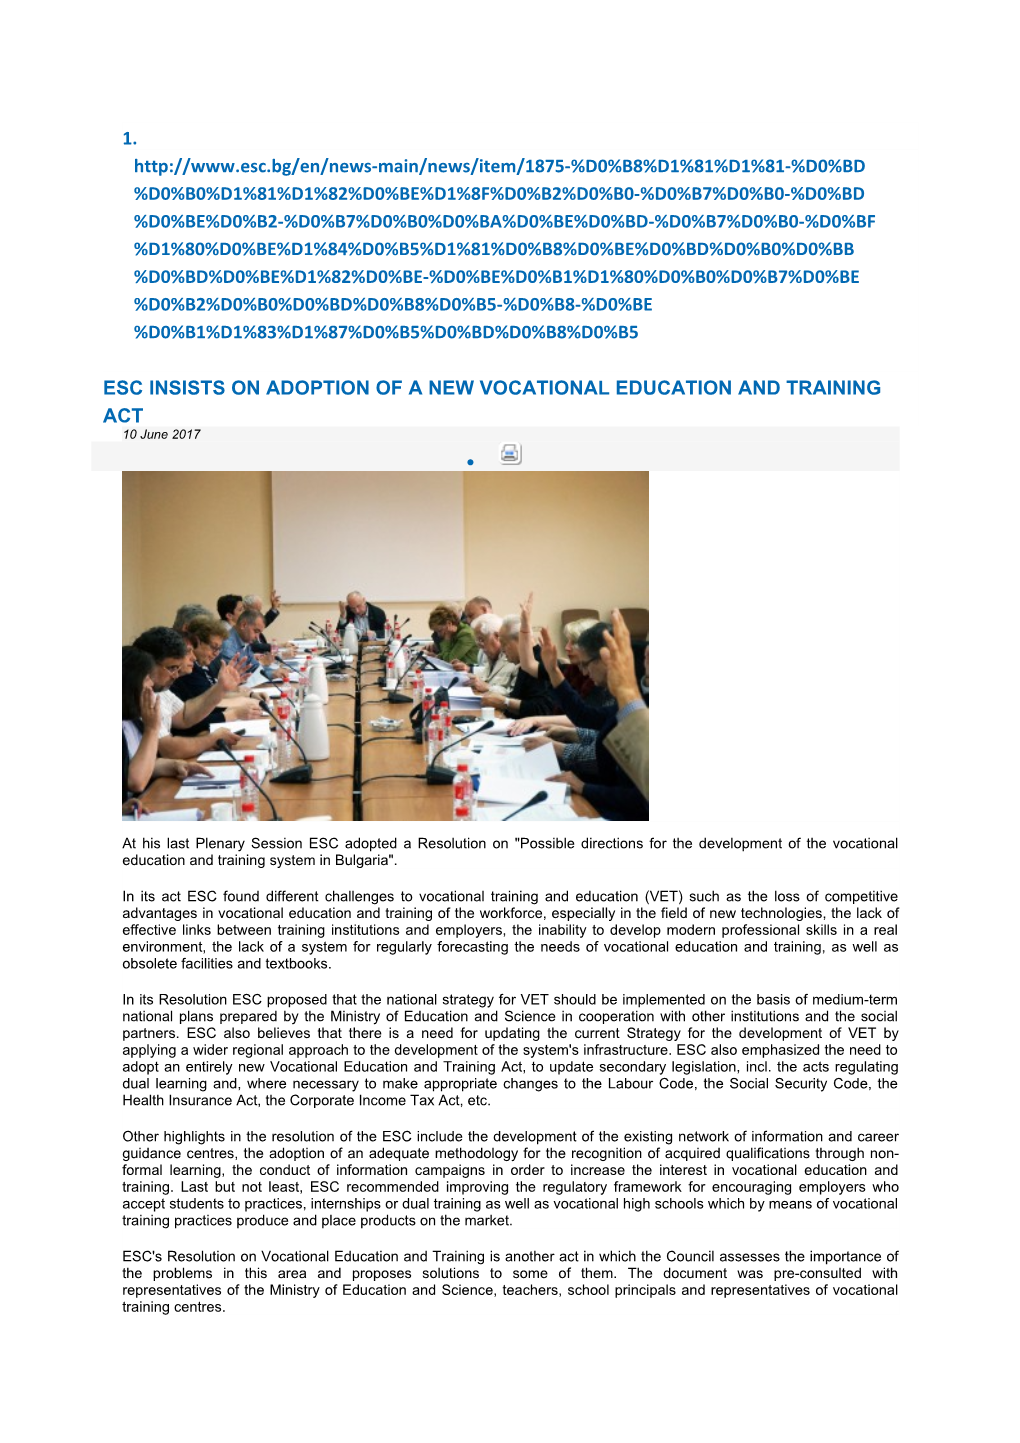 Esc Insists on Adoption of a New Vocational Education and Training Act